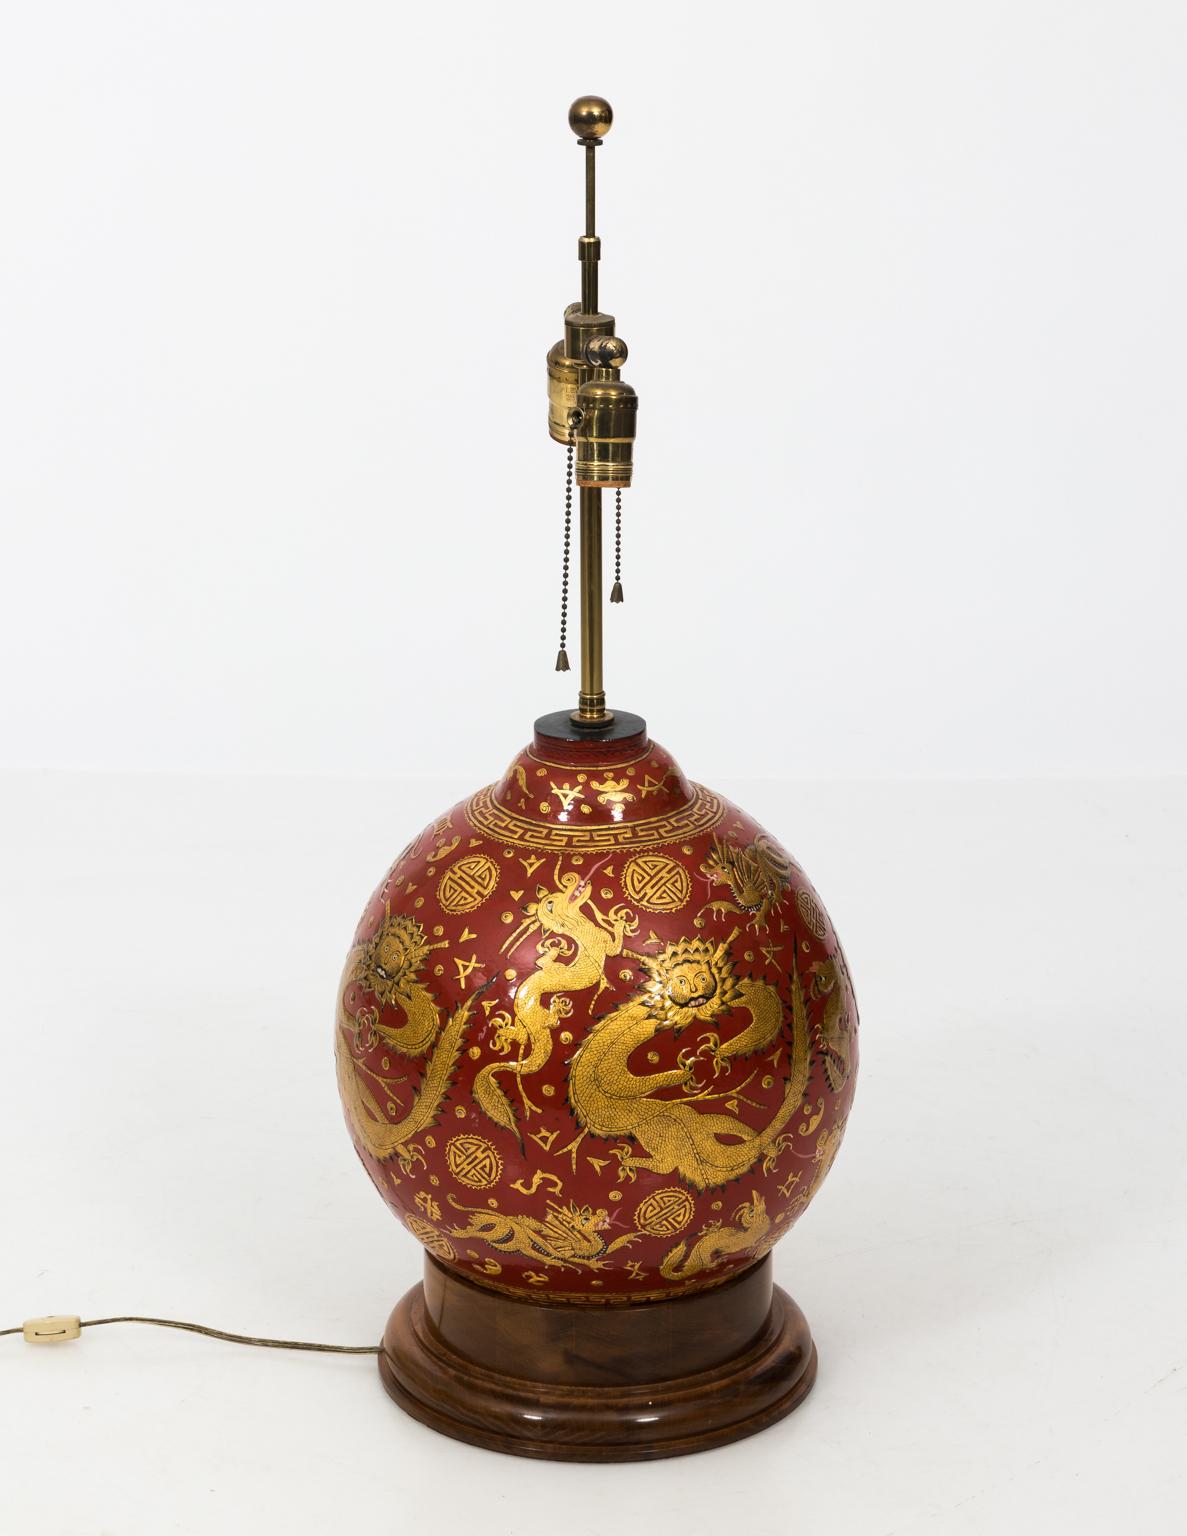 Late 20th century red lacquered Chinese lamp with carved gilded dragons. Wooden base. Shade not included.